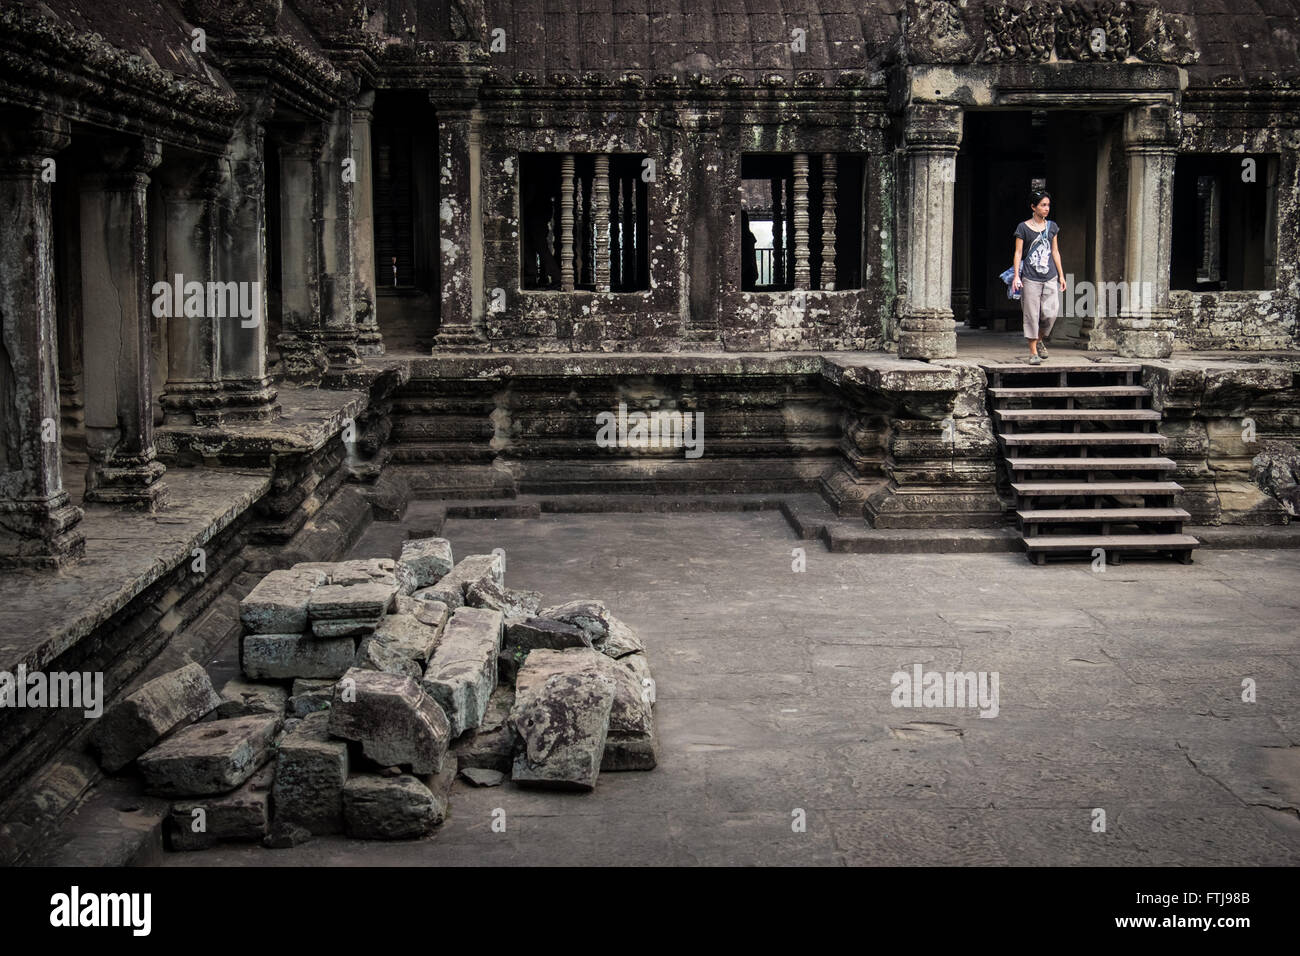 A woman walking in the temple of Angkor Wat, Cambodia. Stock Photo